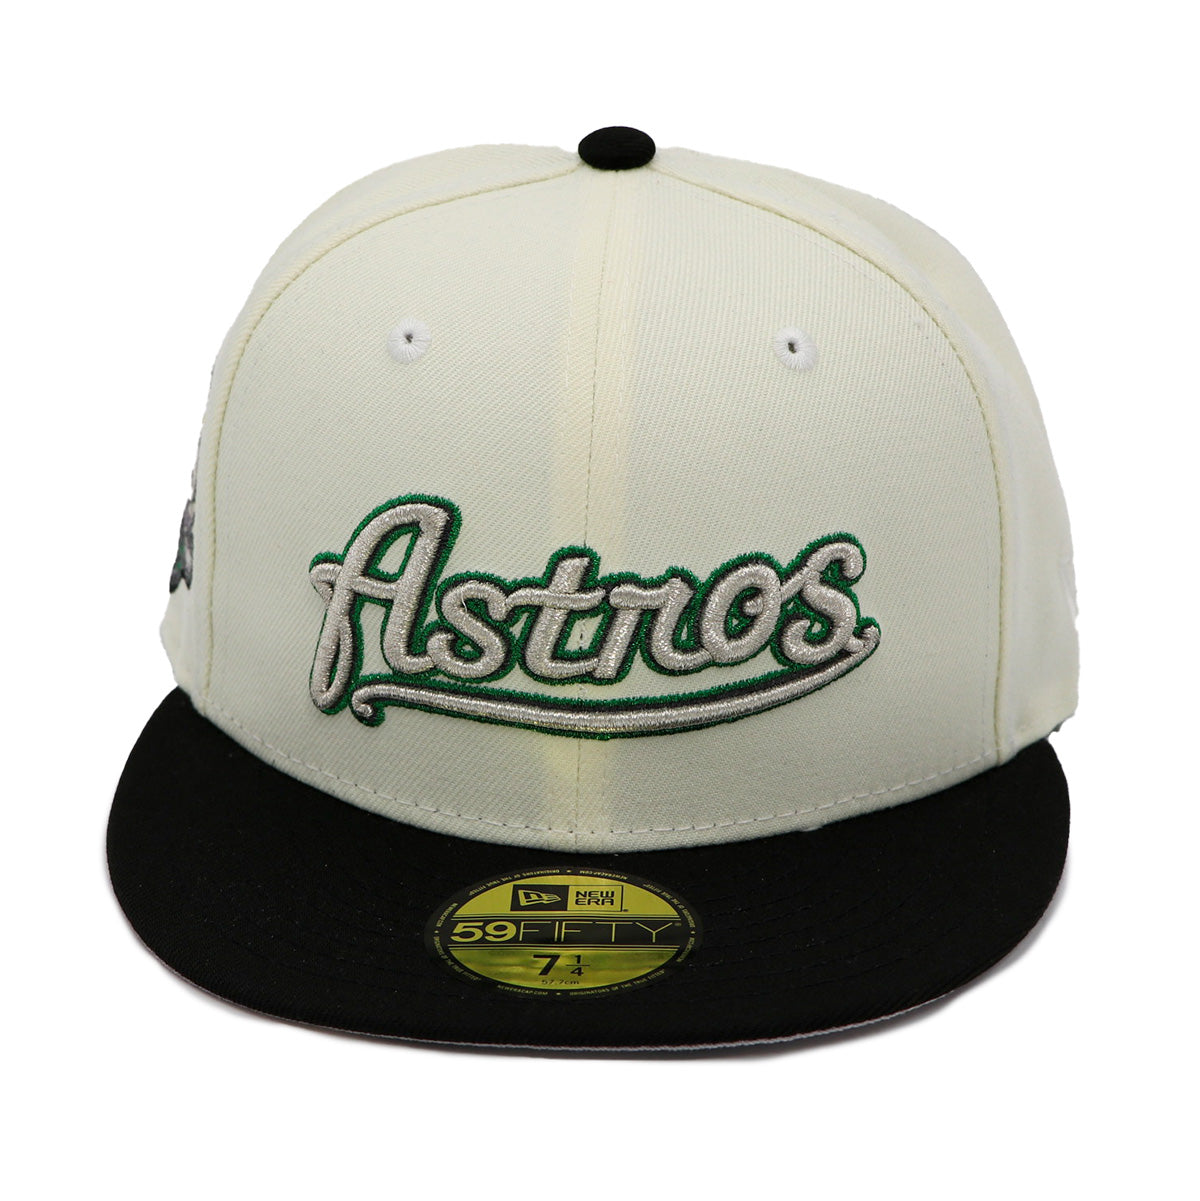 Official New Era Houston Astros MLB Two Tone Chrome White 59FIFTY Fitted Cap  B7823_261 B7823_261